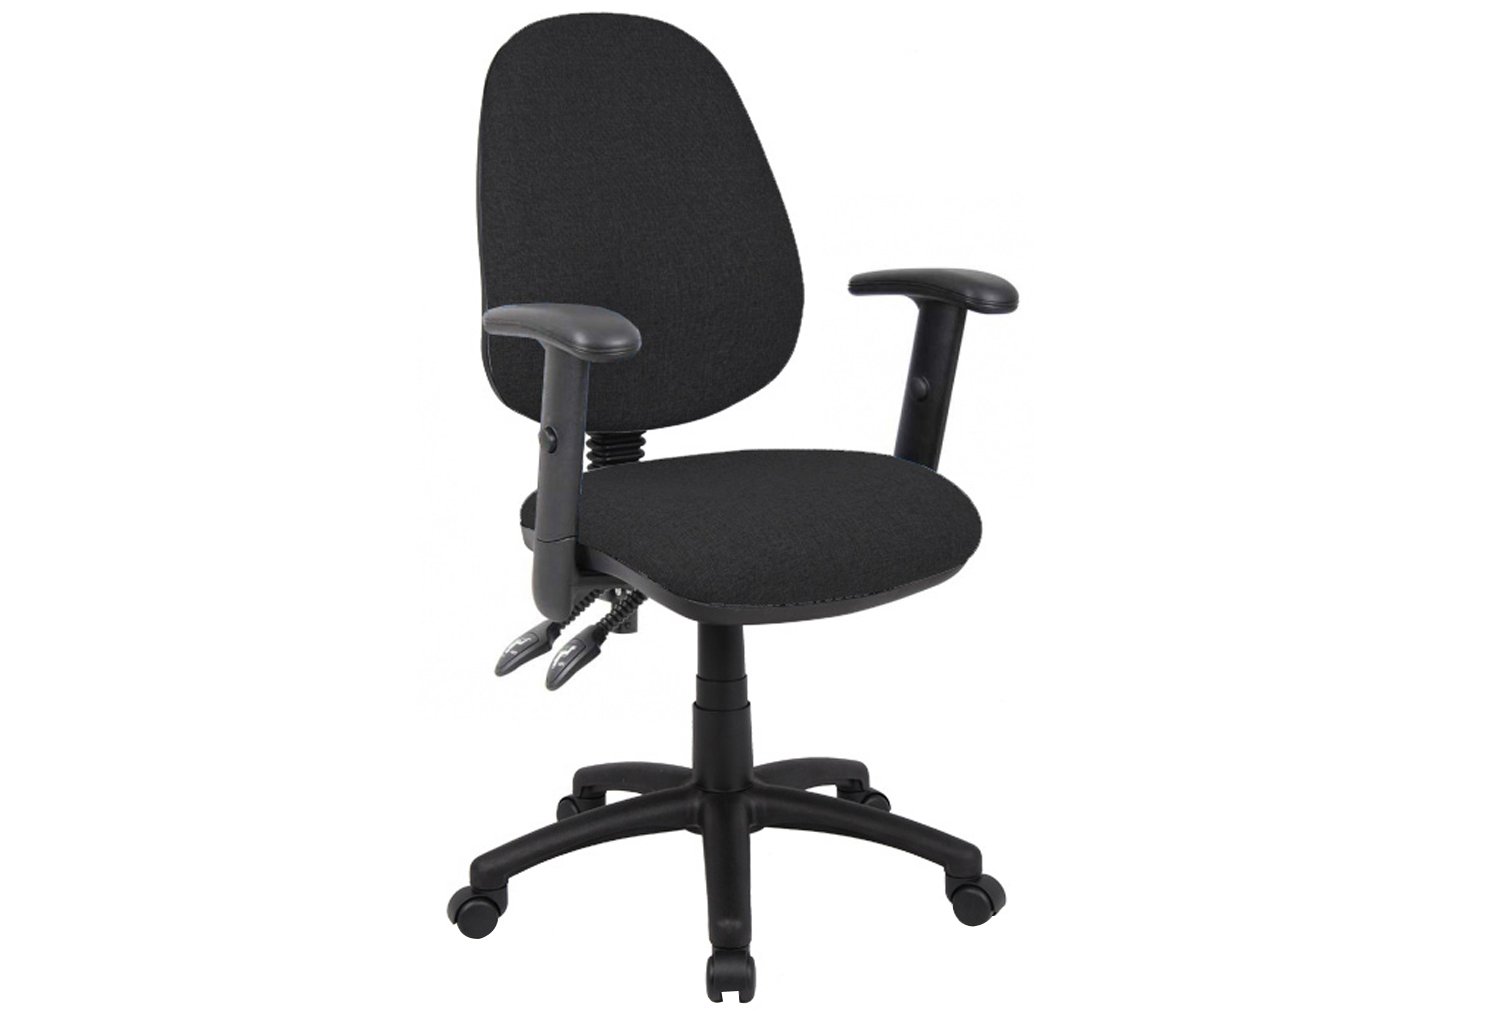 Full Lumbar 2 Lever Operator Office Chair With Adjustable Arms, Black, Fully Installed